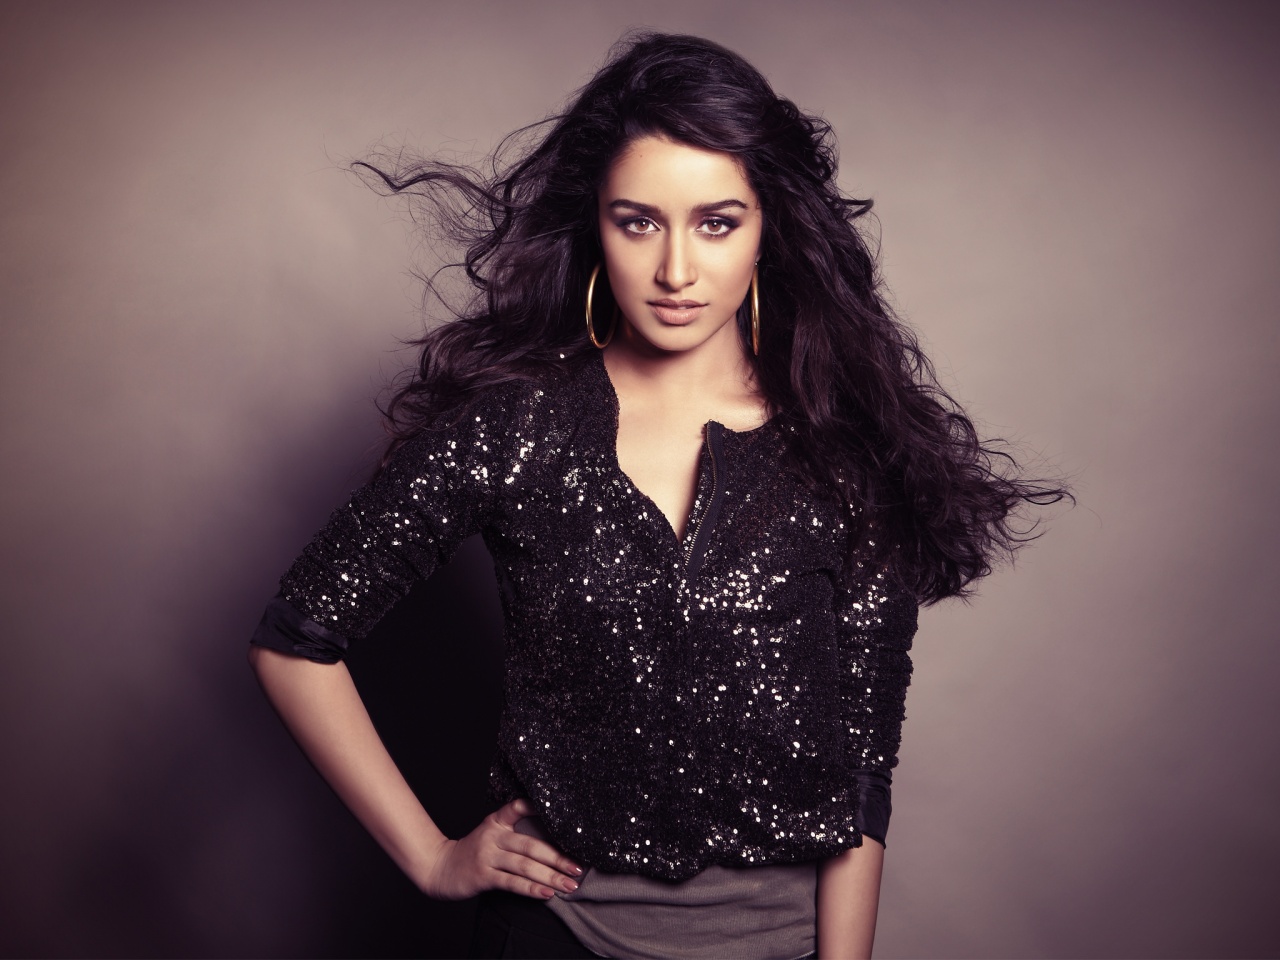 Actress Shraddha Kapoor Wallpapers in jpg format for free download